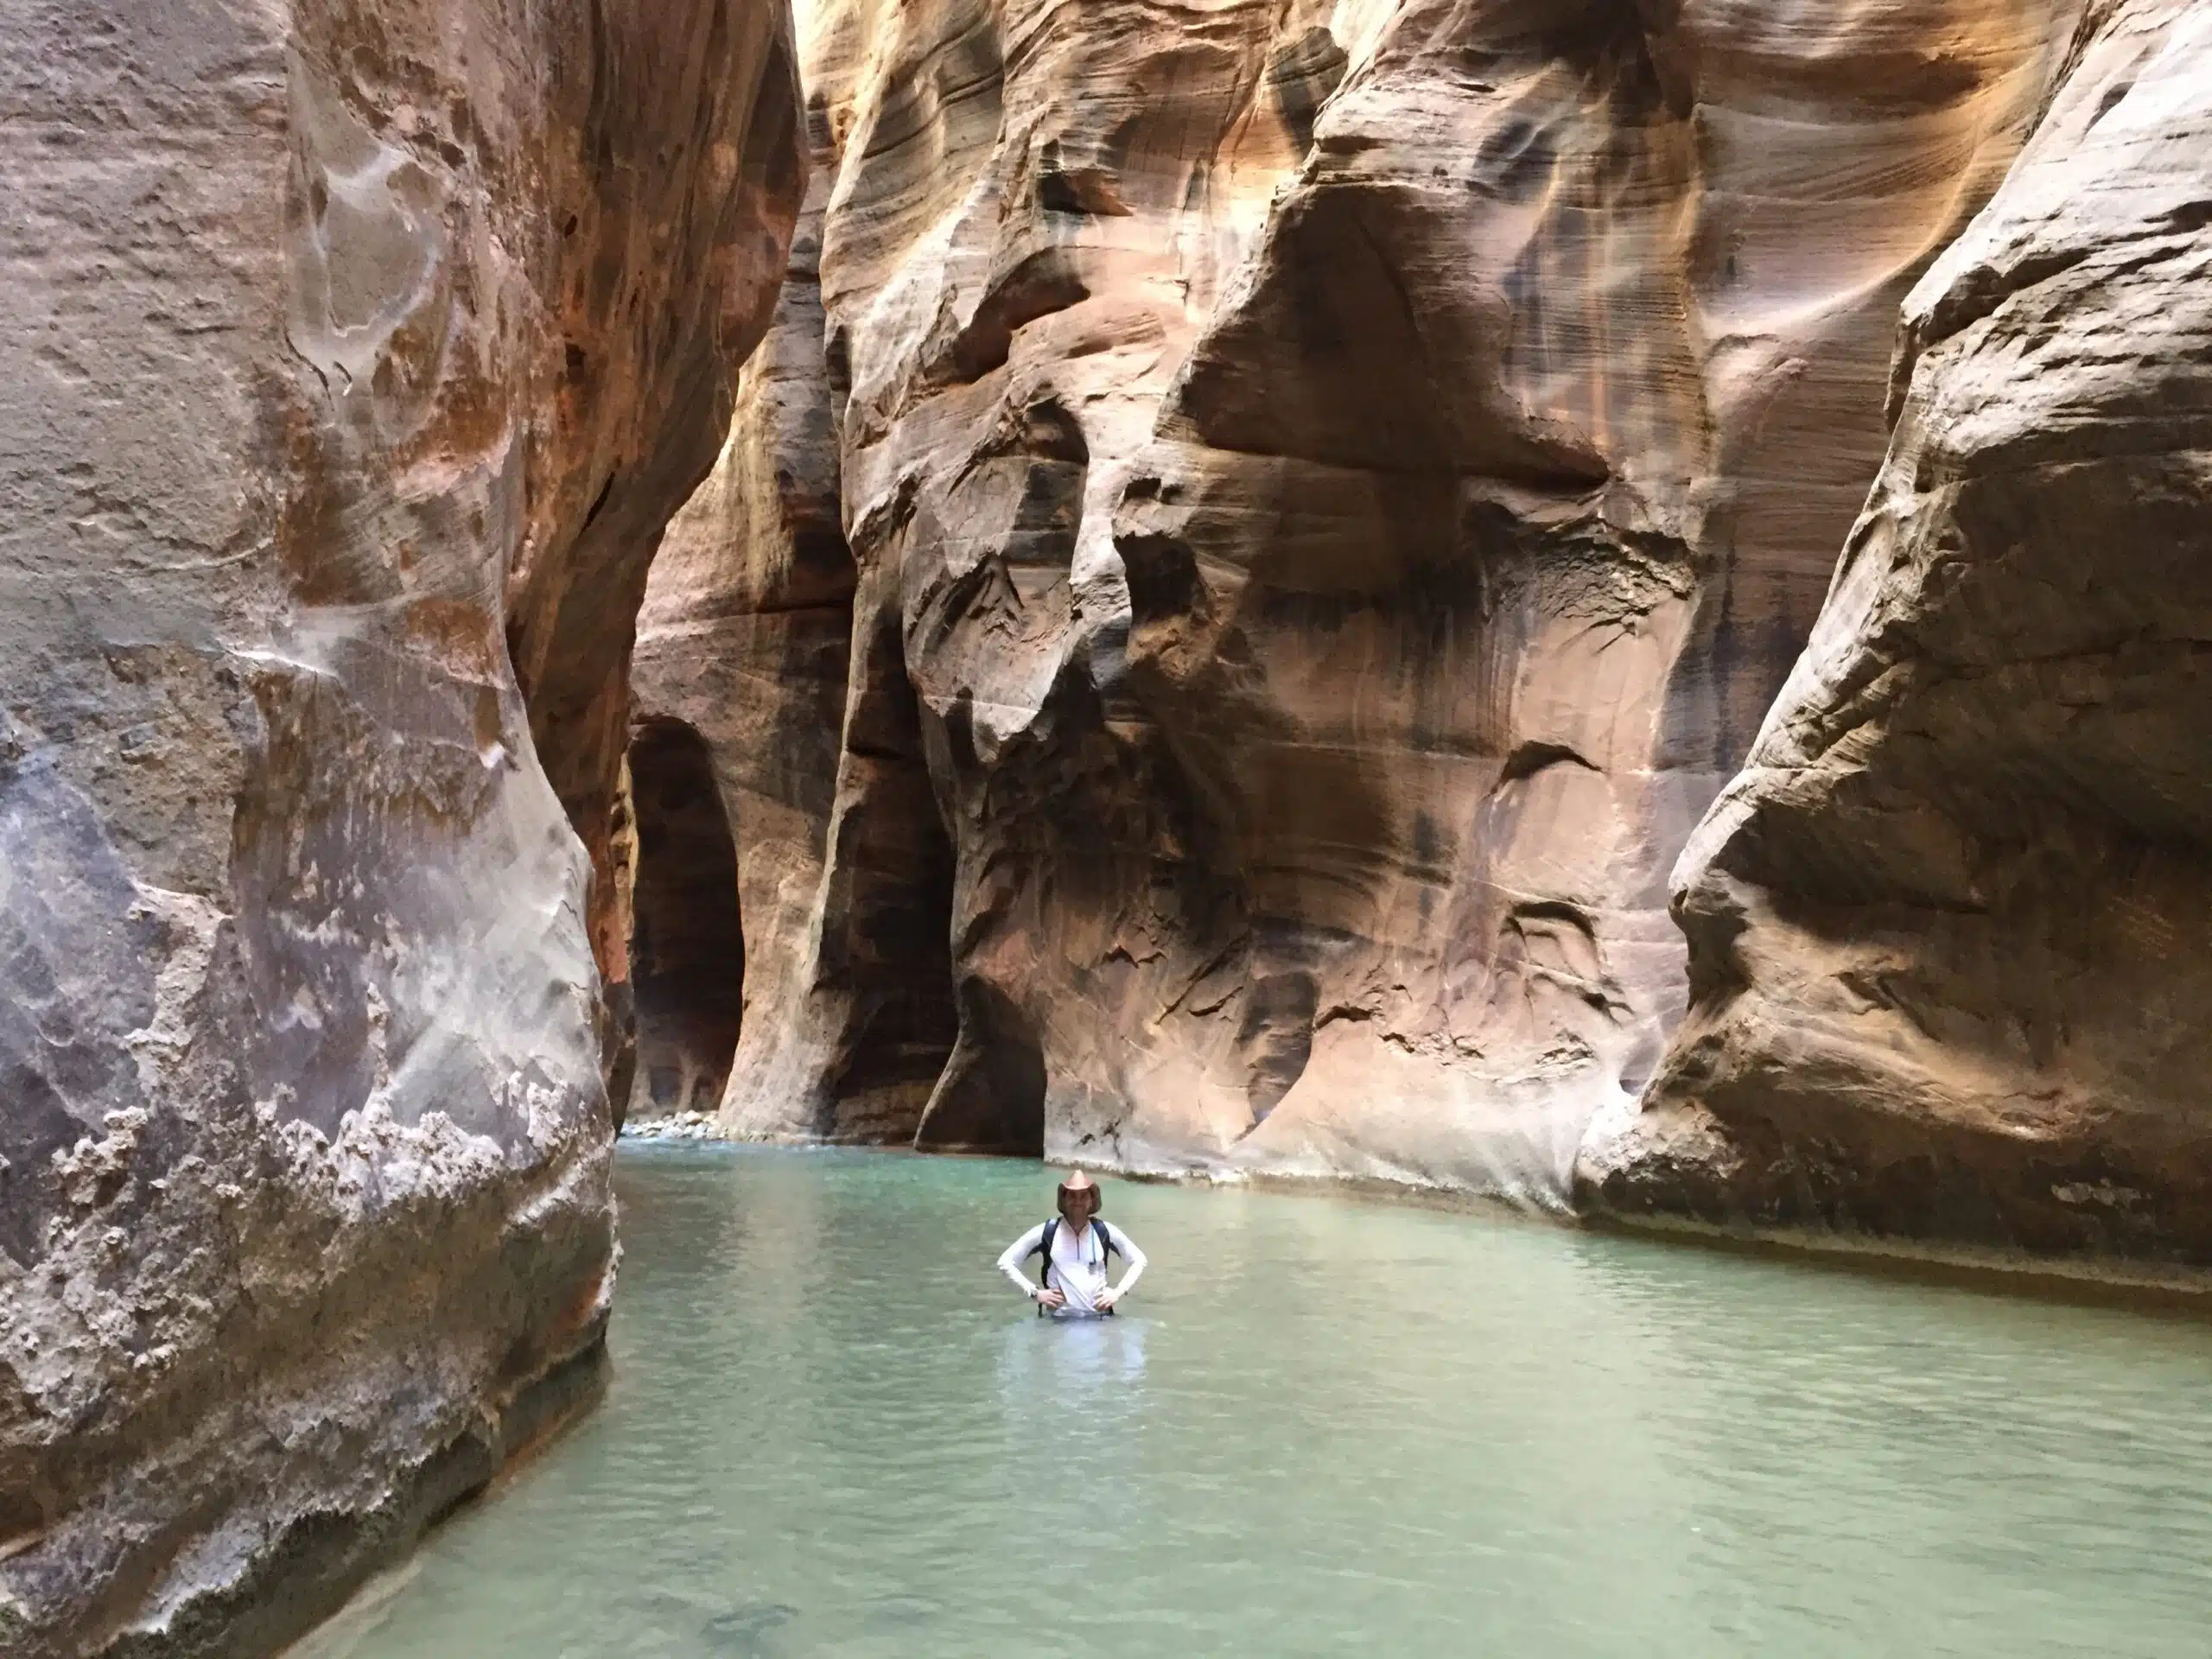 Day hiking in the Zion Narrows